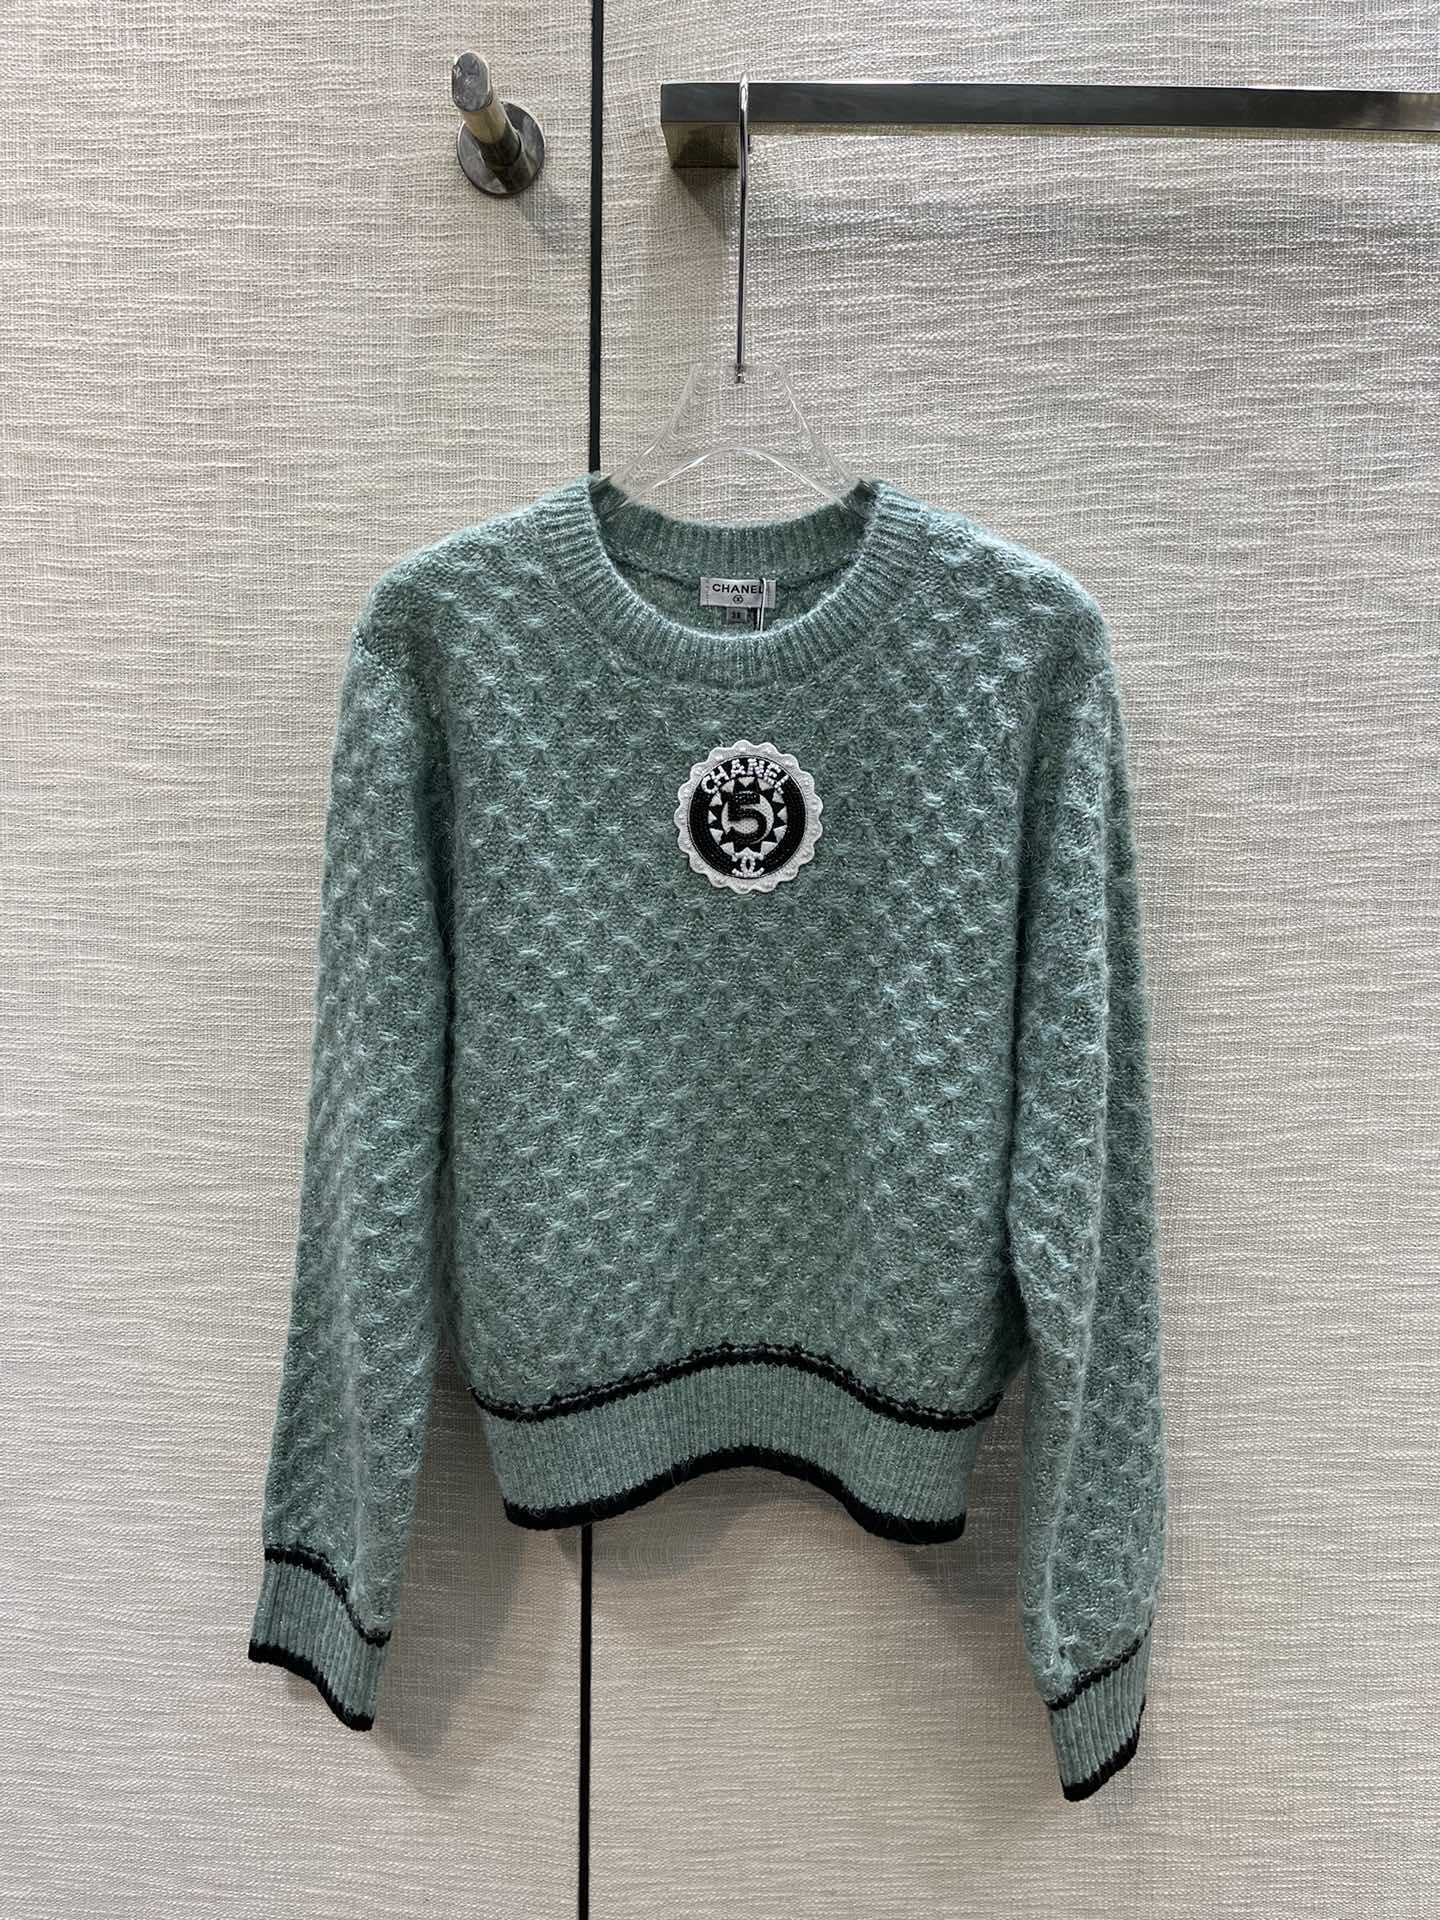 Chanel Clothing Knit Sweater Cashmere Knitting Fall/Winter Collection